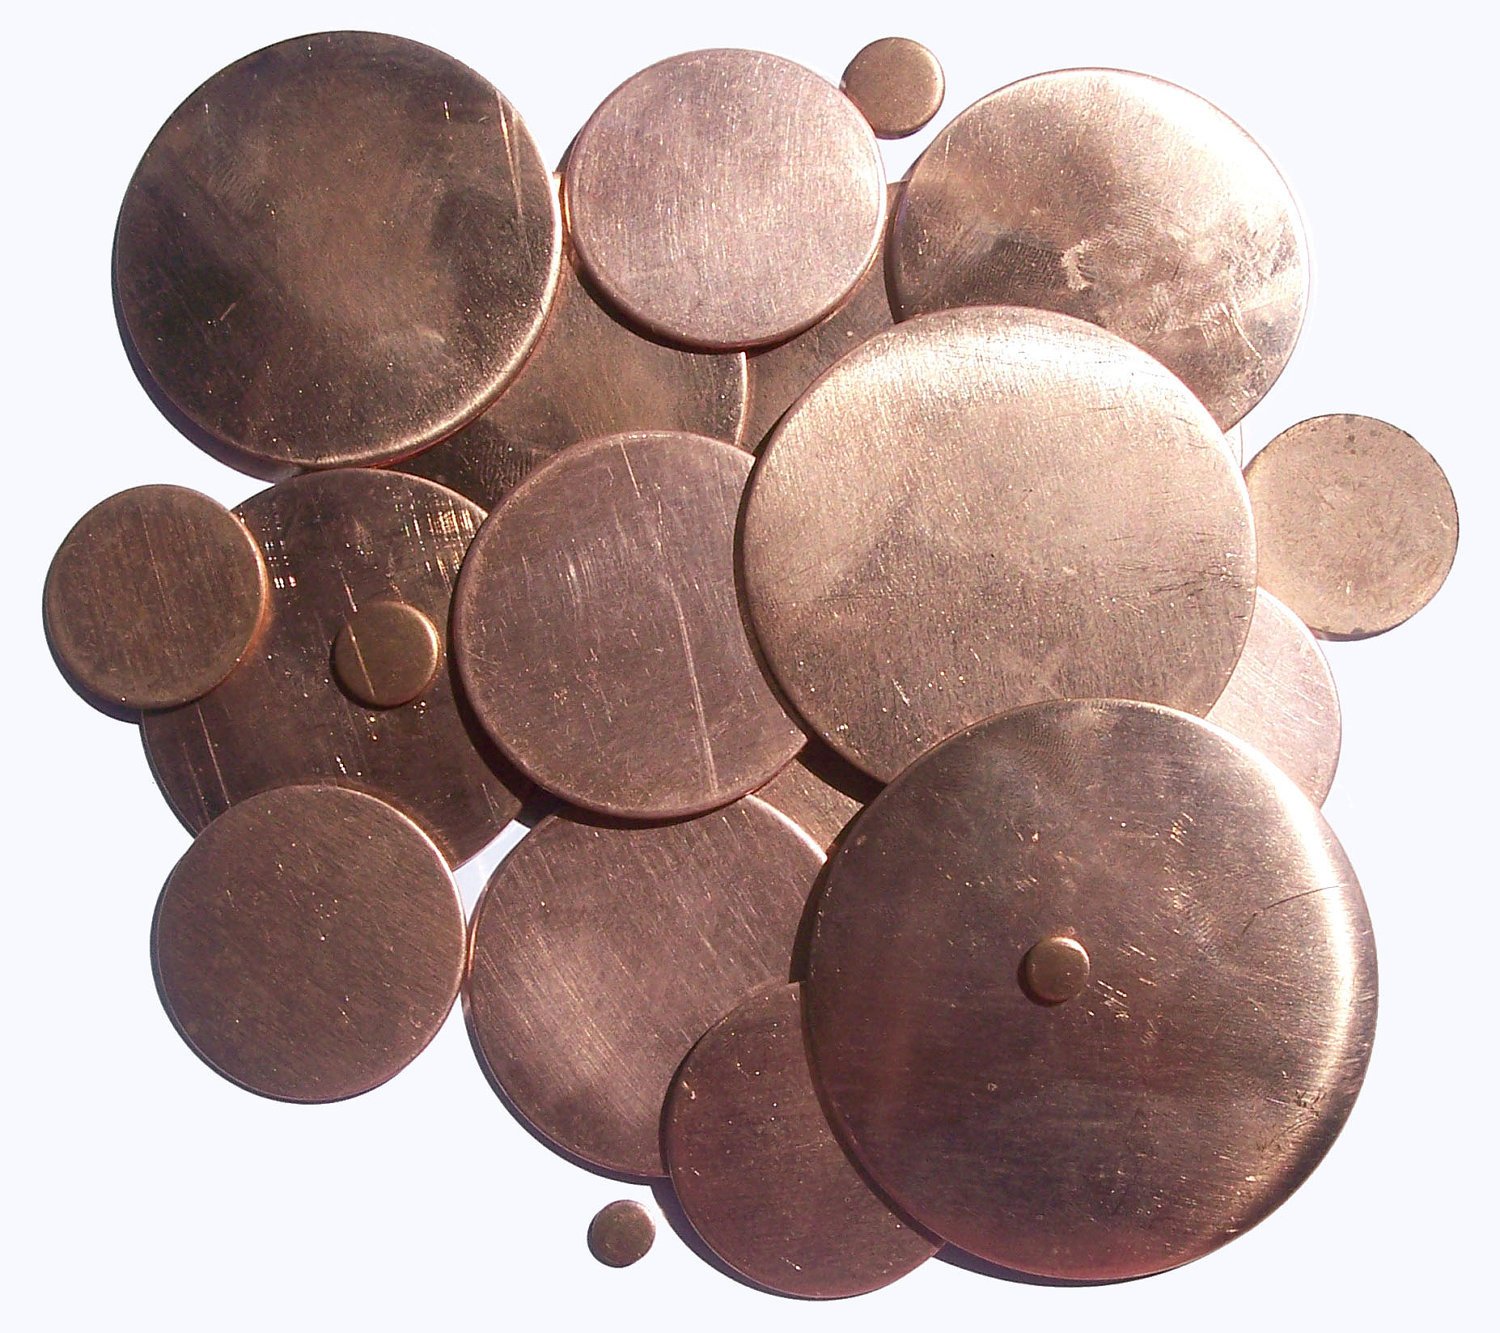 Copper Jewelry Disc Blank 20g 18mm Cutout Charms for Enameling Texturing Soldering - 8 Pieces